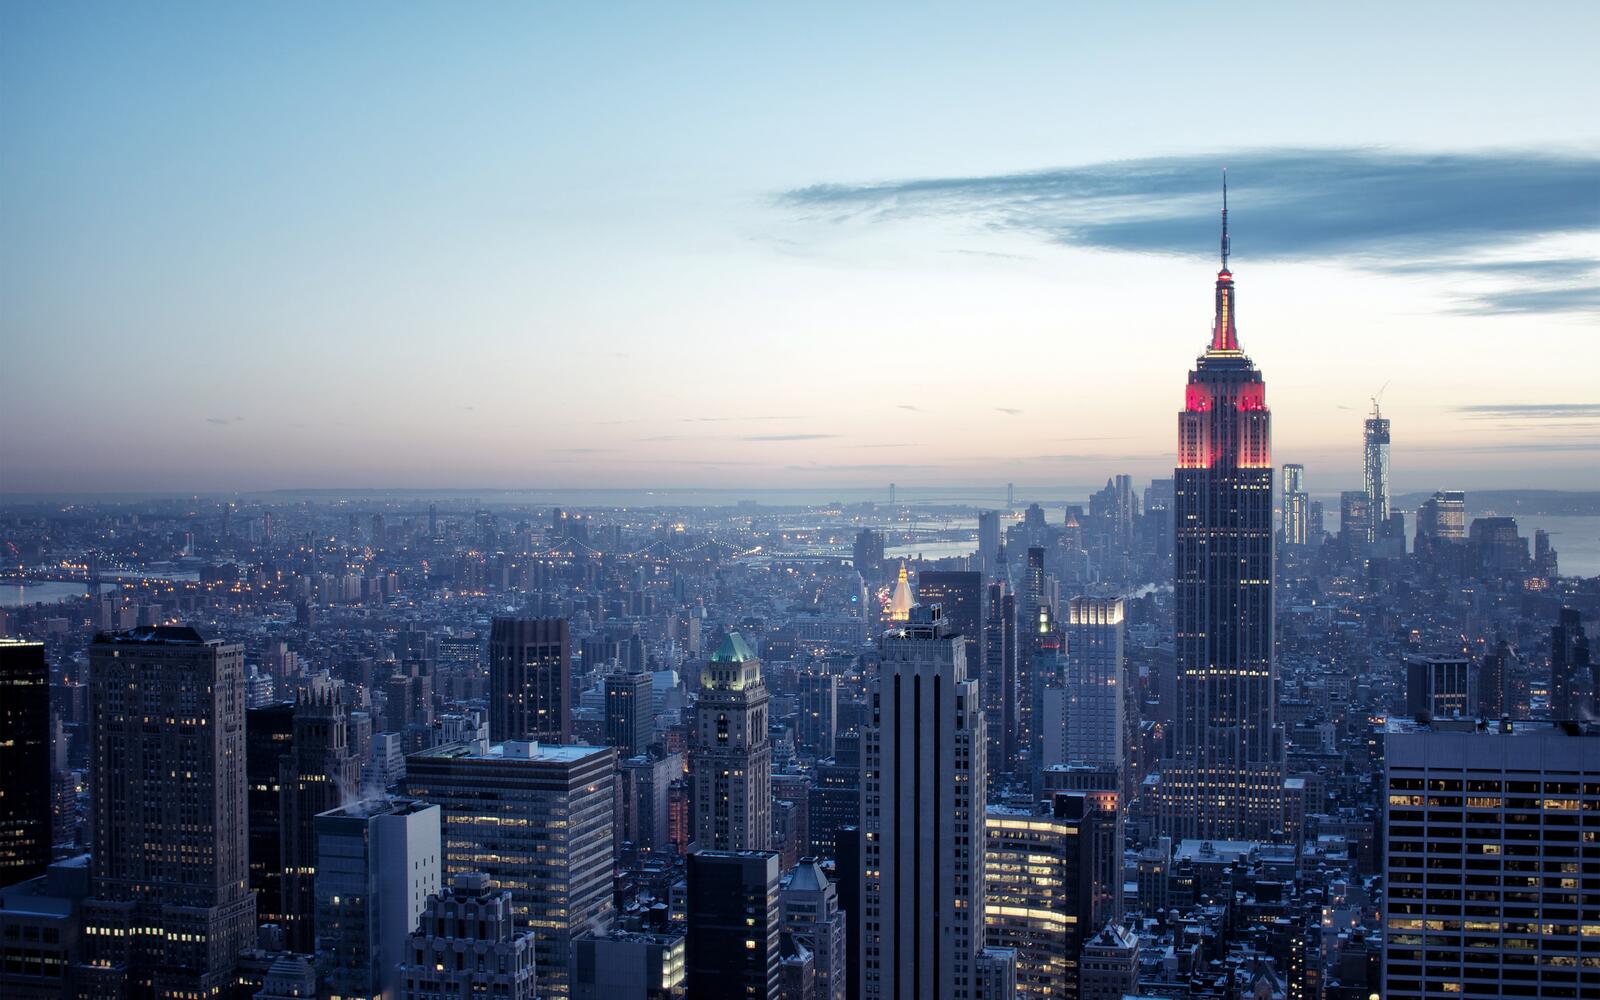 Wallpapers sunset wallpaper empire state building New York on the desktop